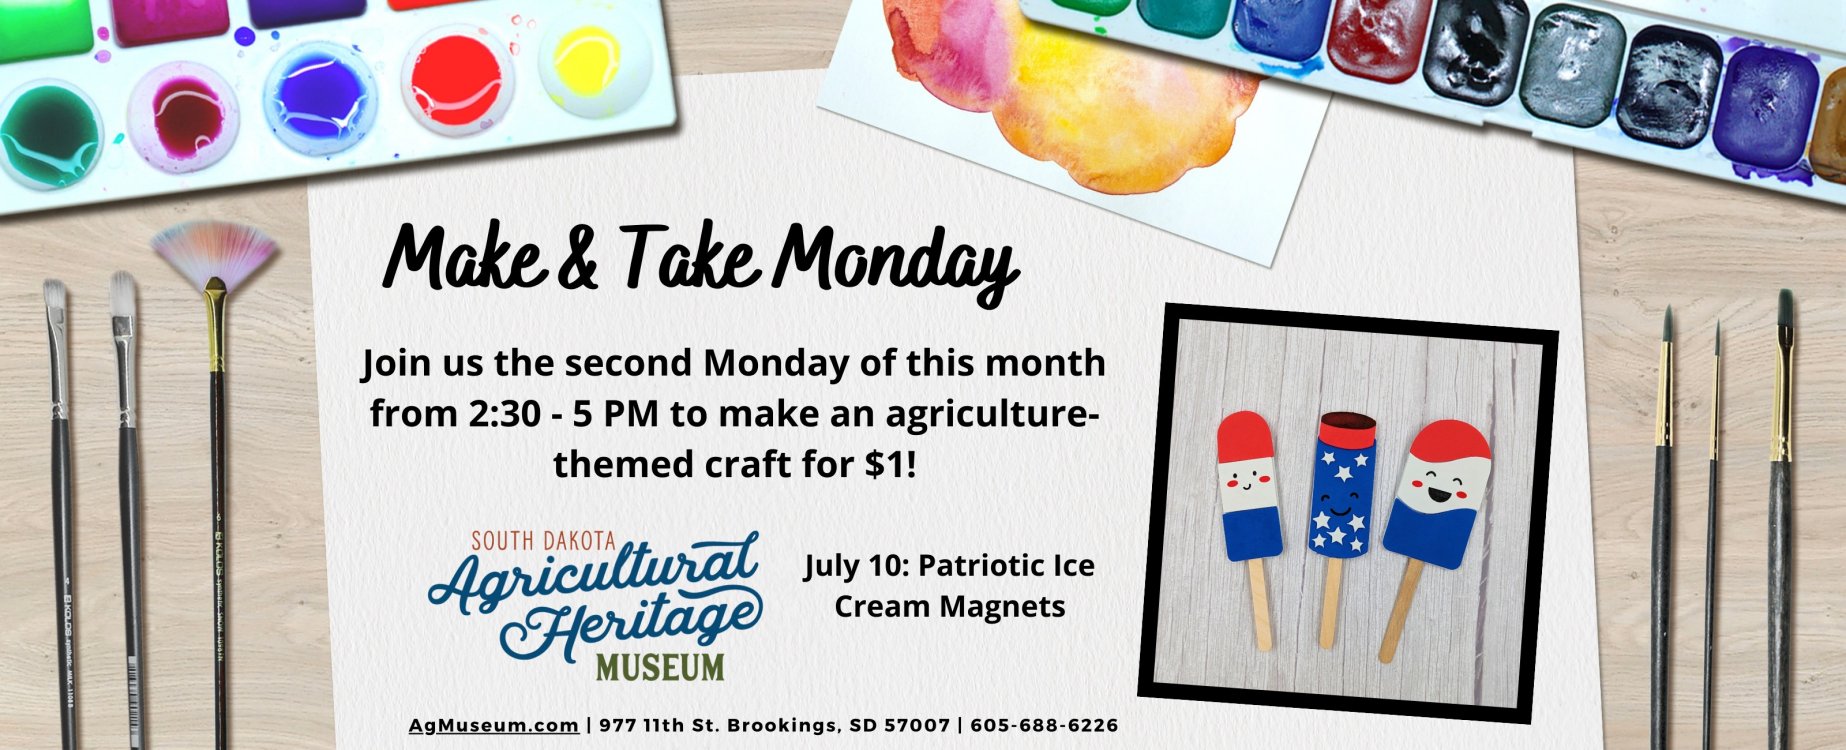 Make & Take Monday Join us on the 2nd Monday of each month from 2:30 to 5 PM to make an agriculture-themed craft for $1!  July 10 Craft: Patriotic Ice Cream Magnets.  agmuseum.com.  977 11th St. Brookings, SD 57007. 605-688-6226